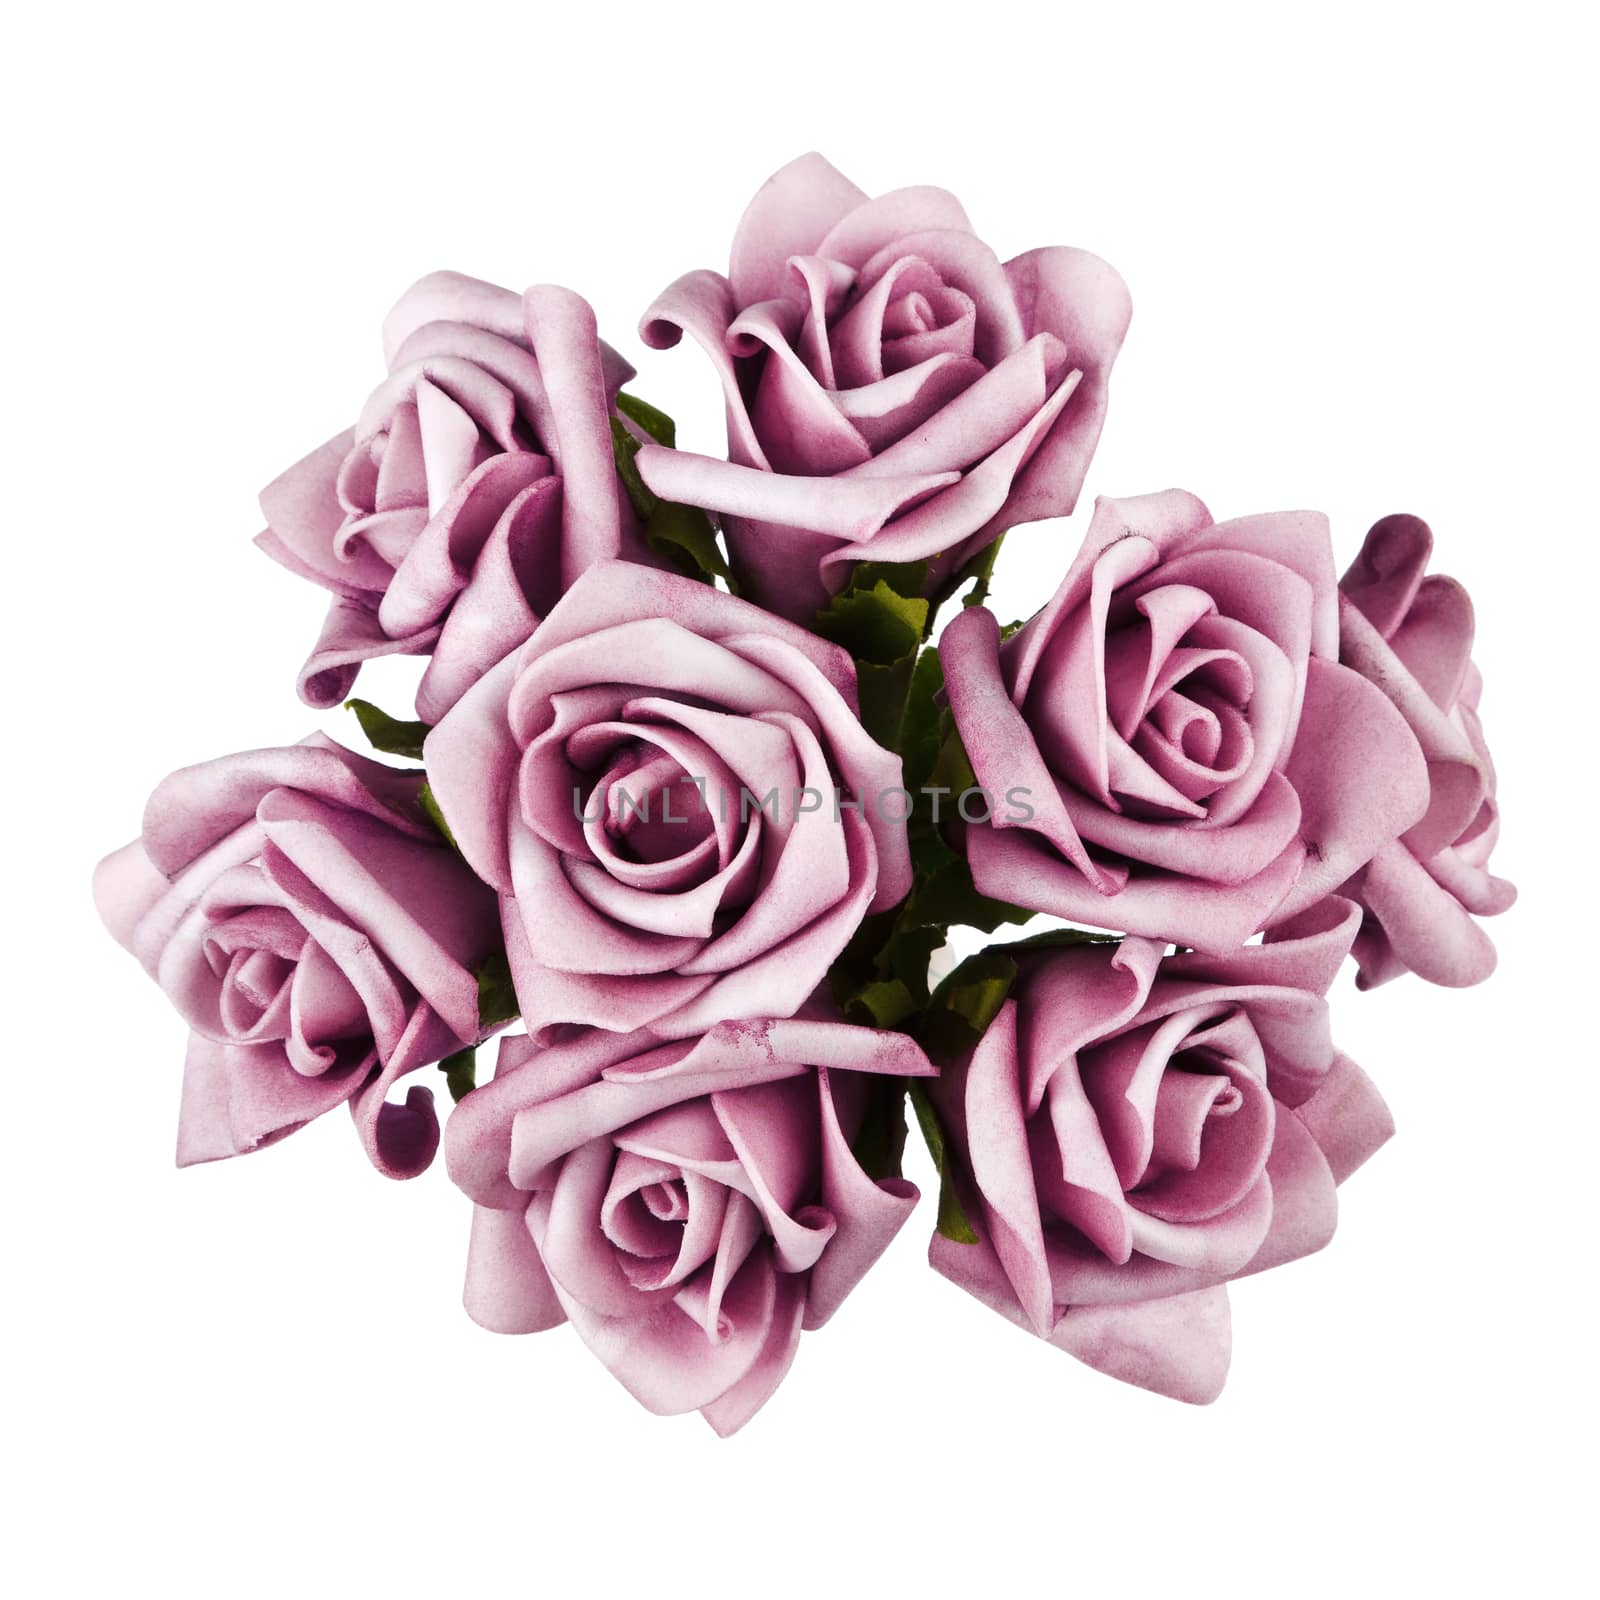 bouquet of purple roses isolated on white background